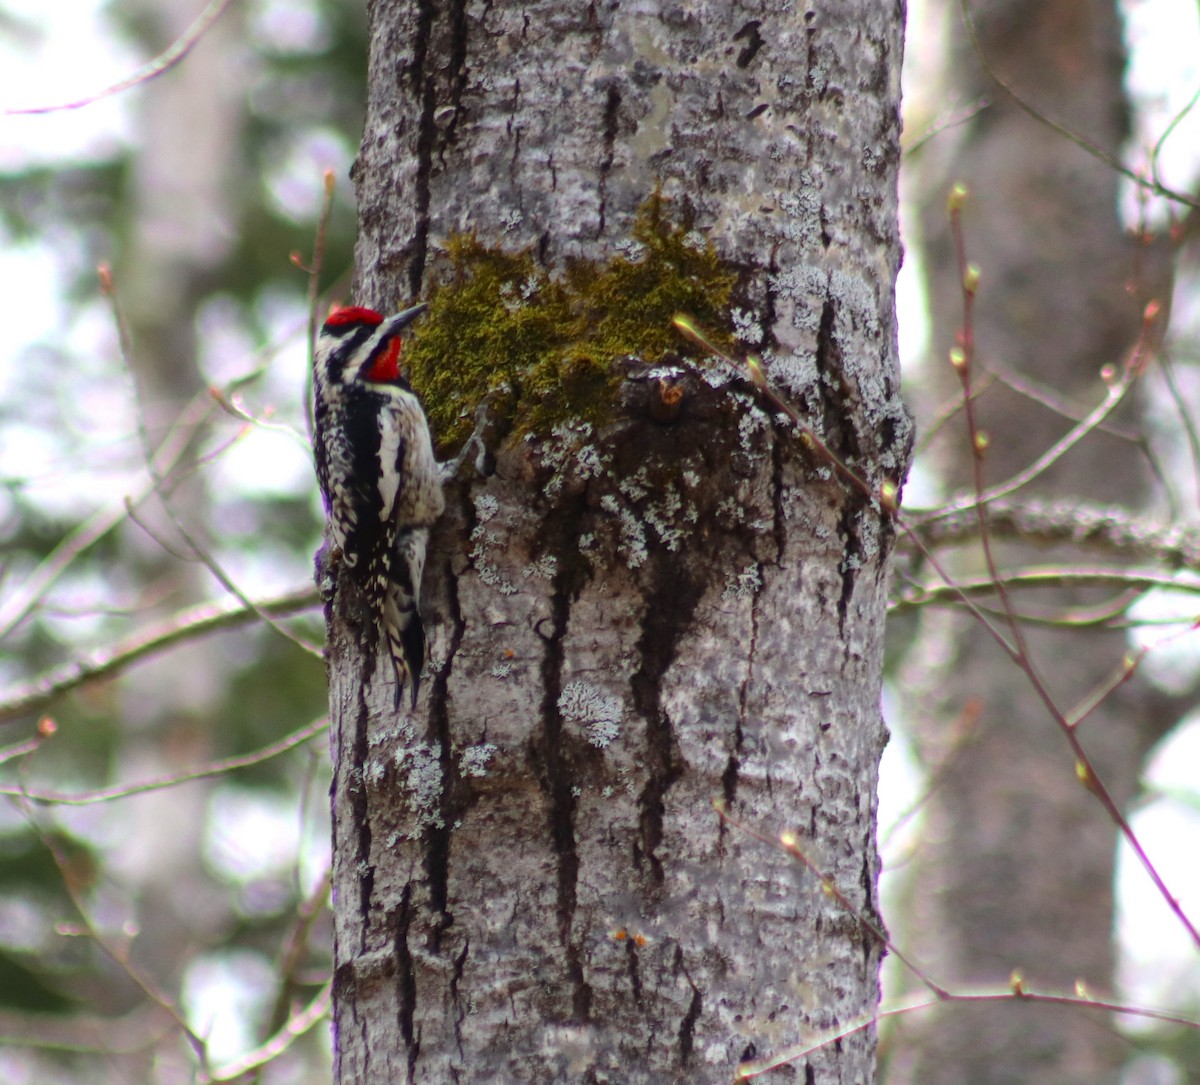 Yellow-bellied Sapsucker - Cindy Grimes